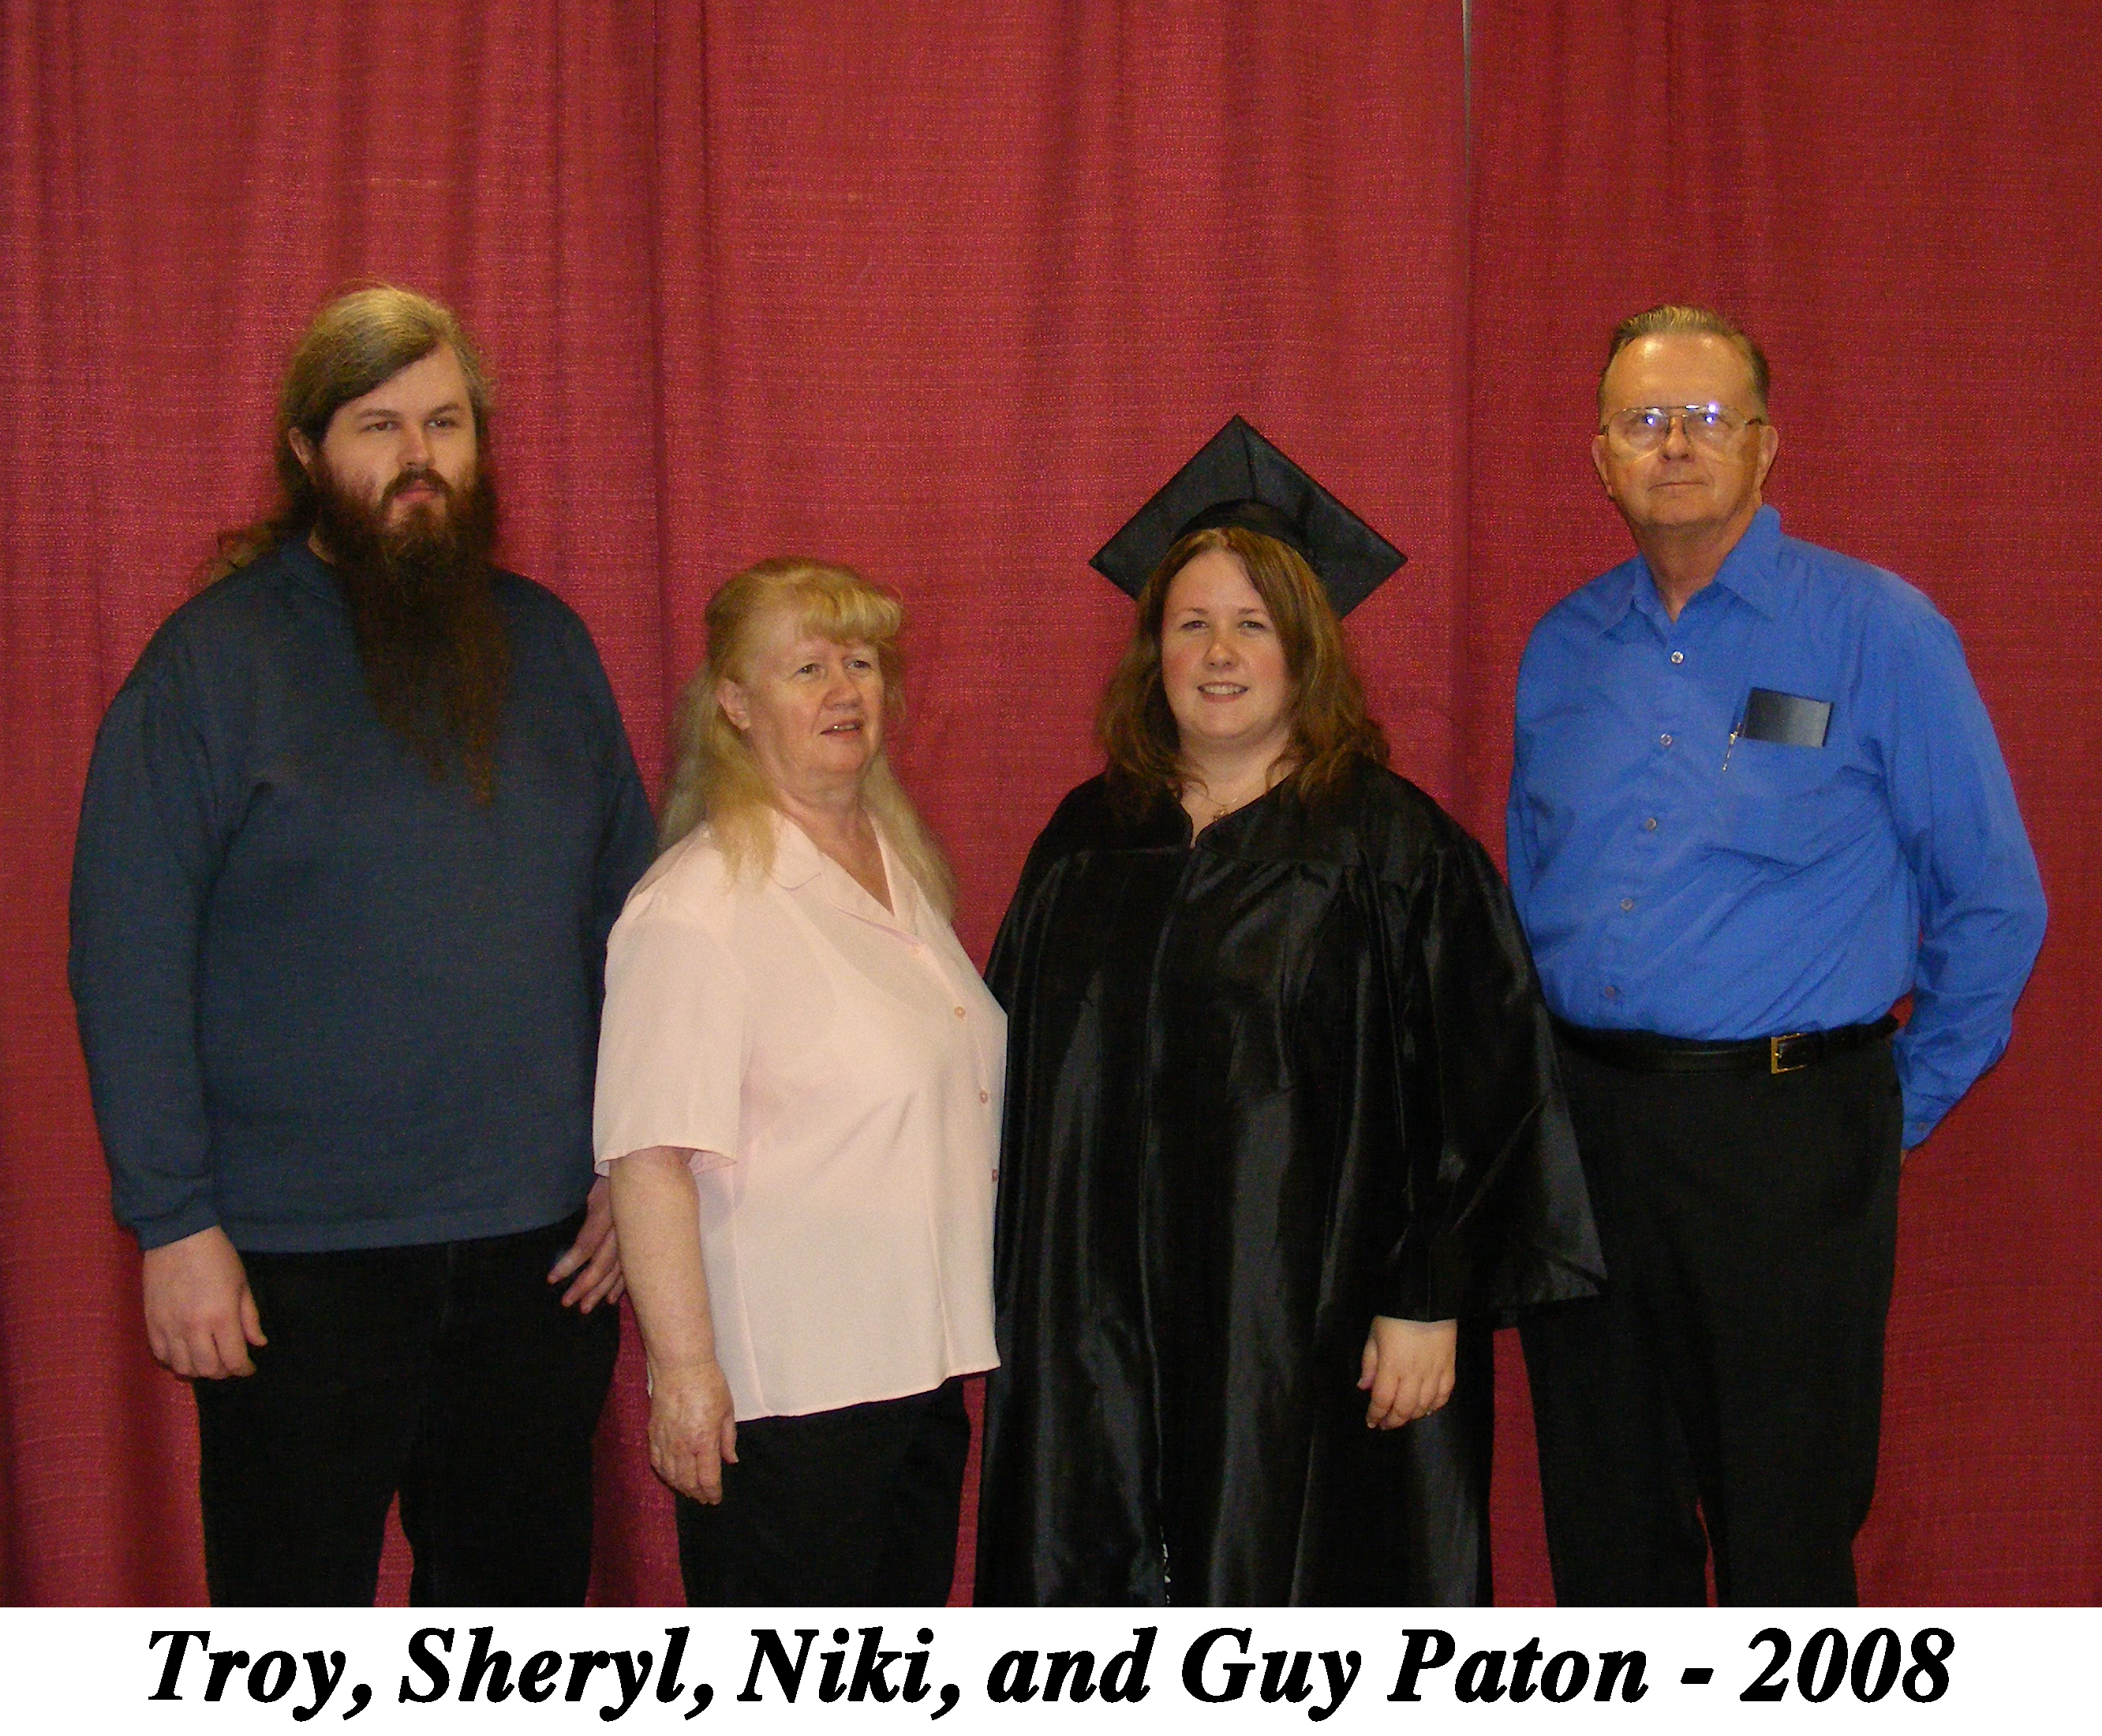 The family standing in front of a red curtain.